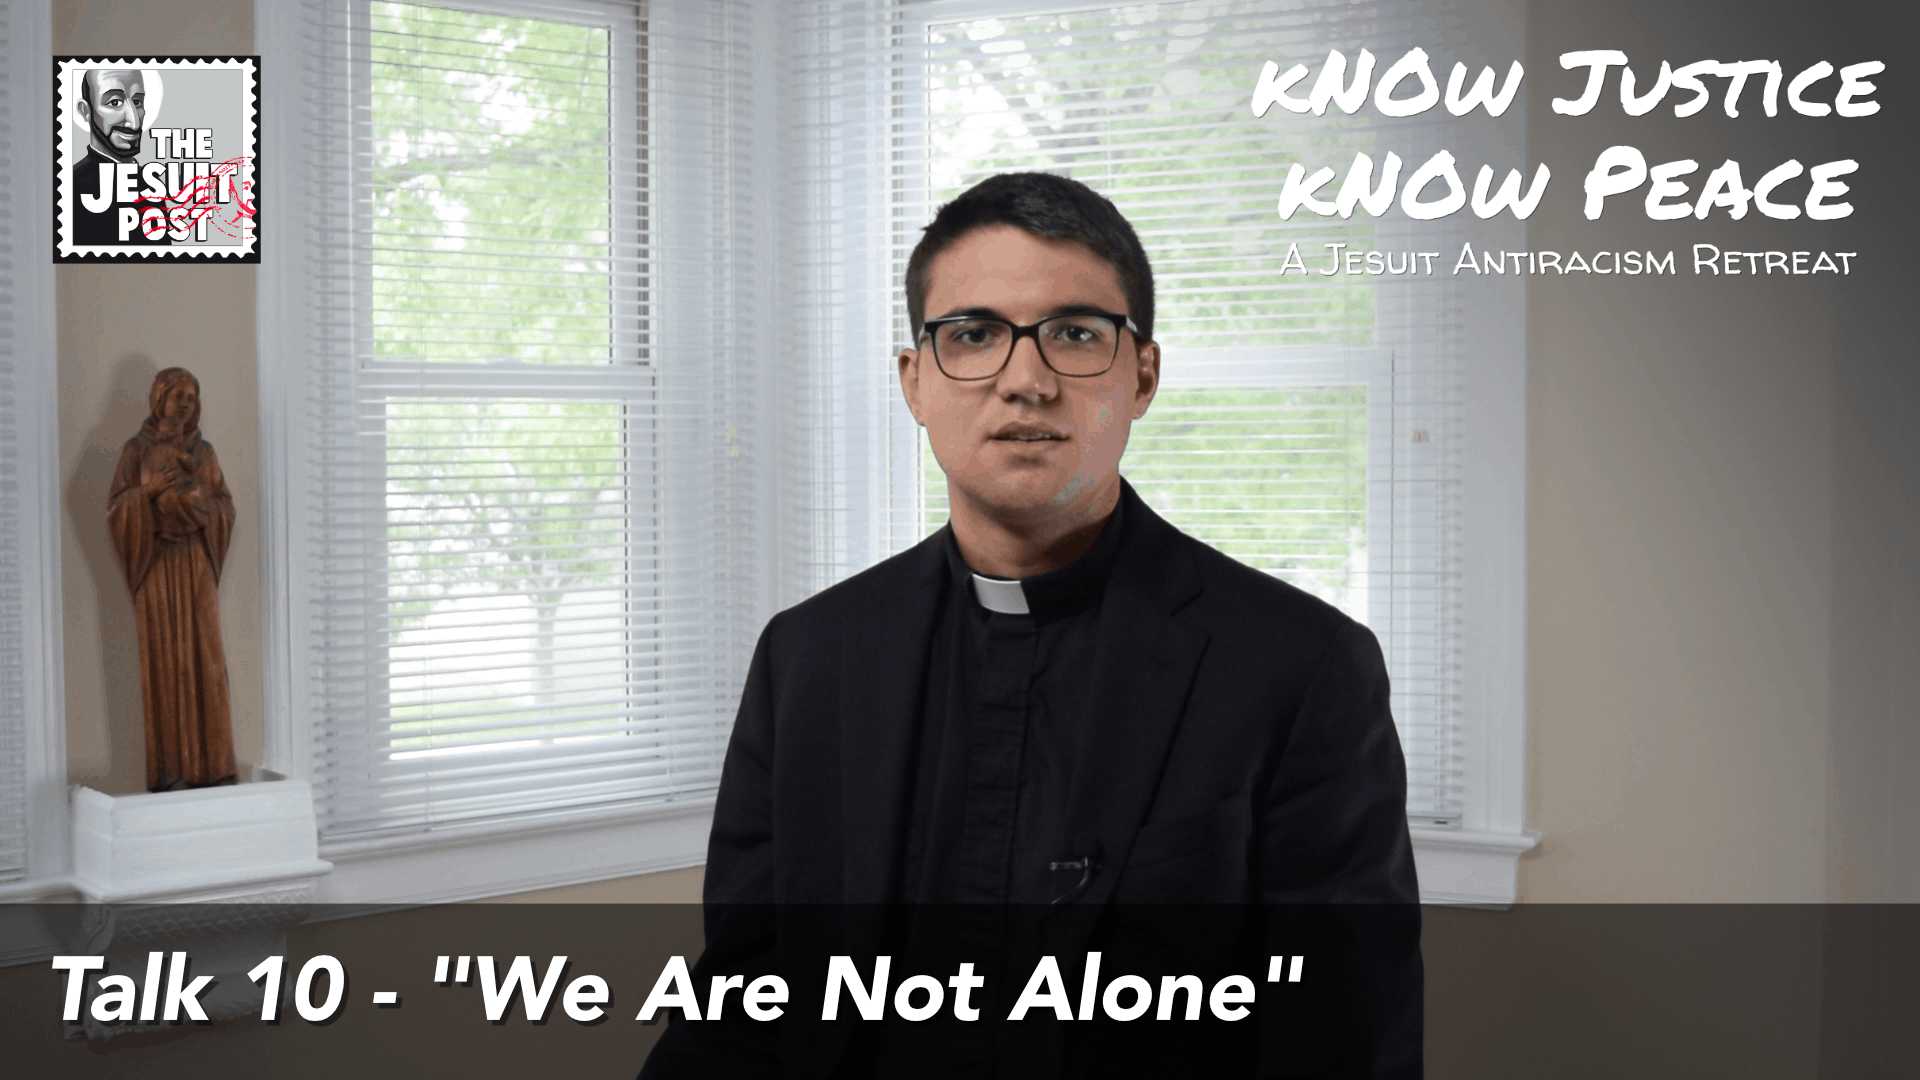 We Are Not Alone | Know Justice, Know Peace: A Jesuit Antiracism Retreat